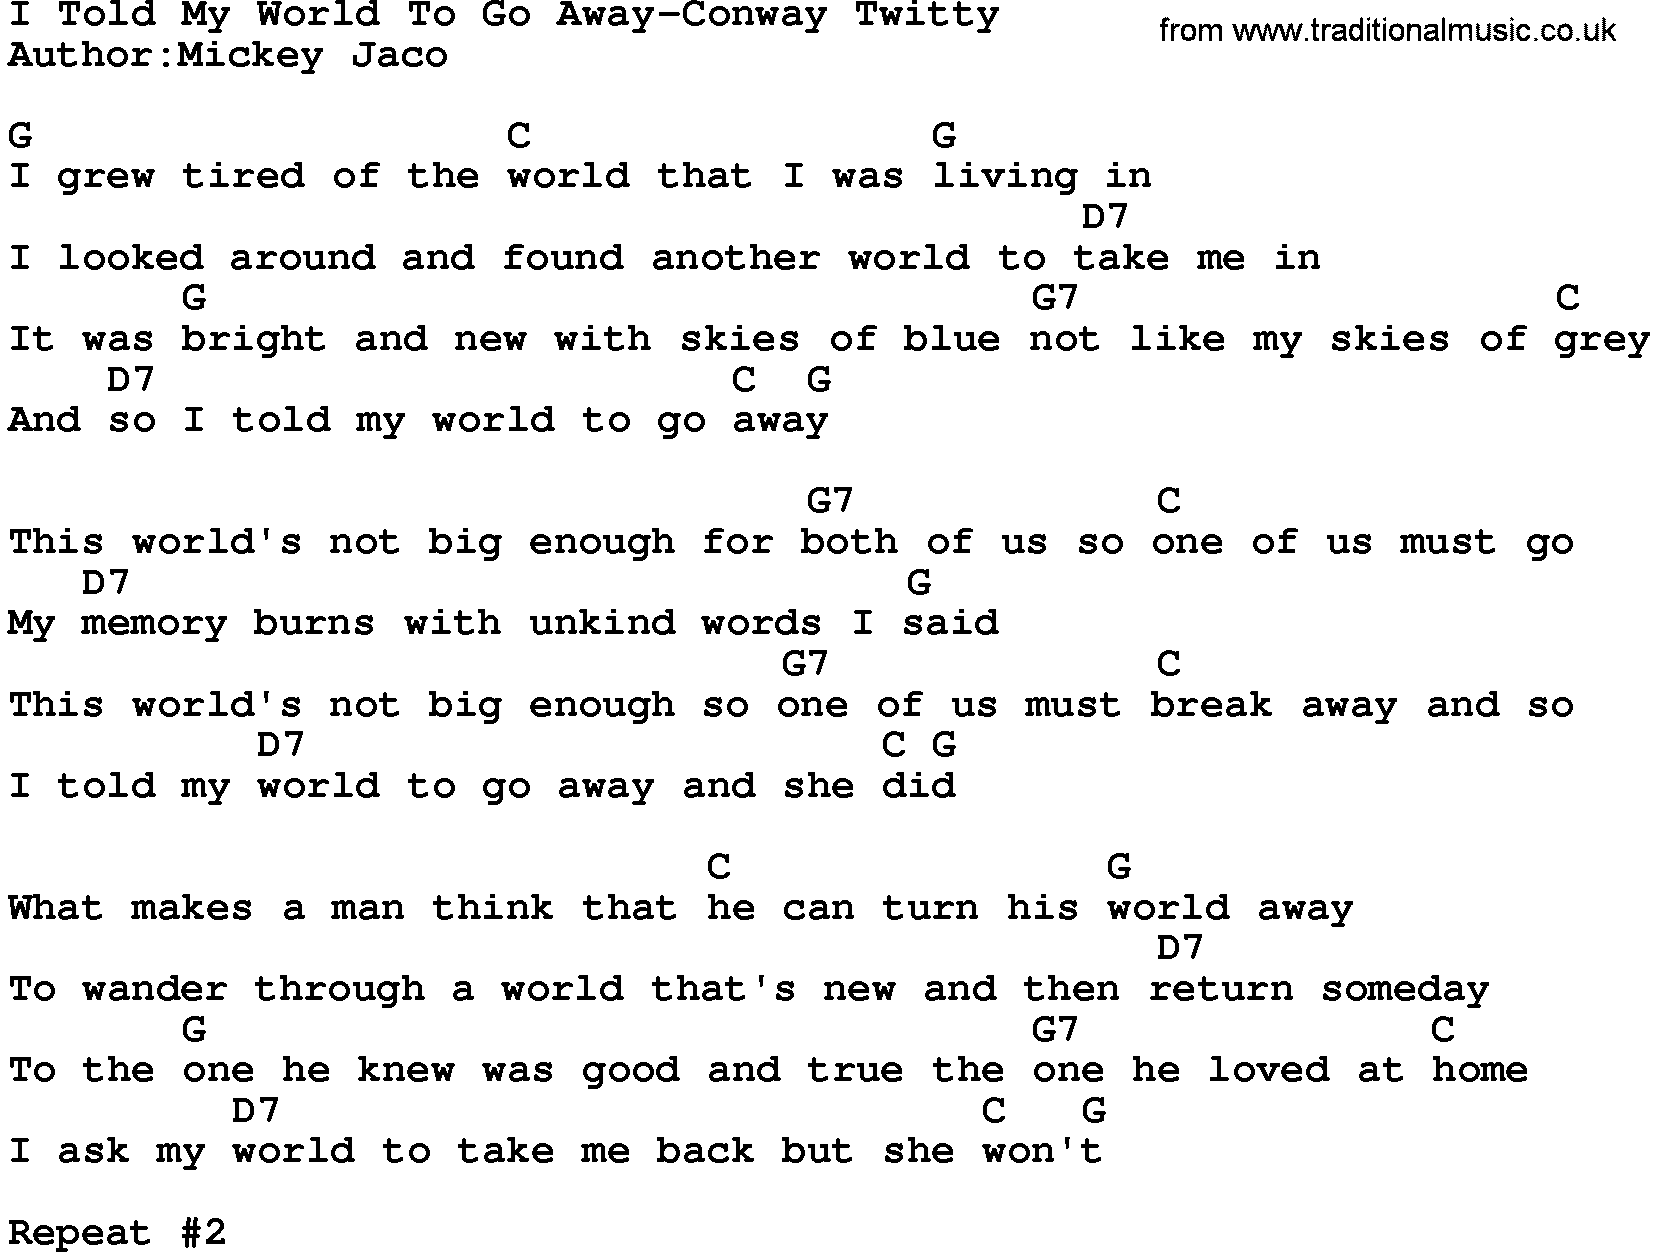 Country music song: I Told My World To Go Away-Conway Twitty lyrics and chords